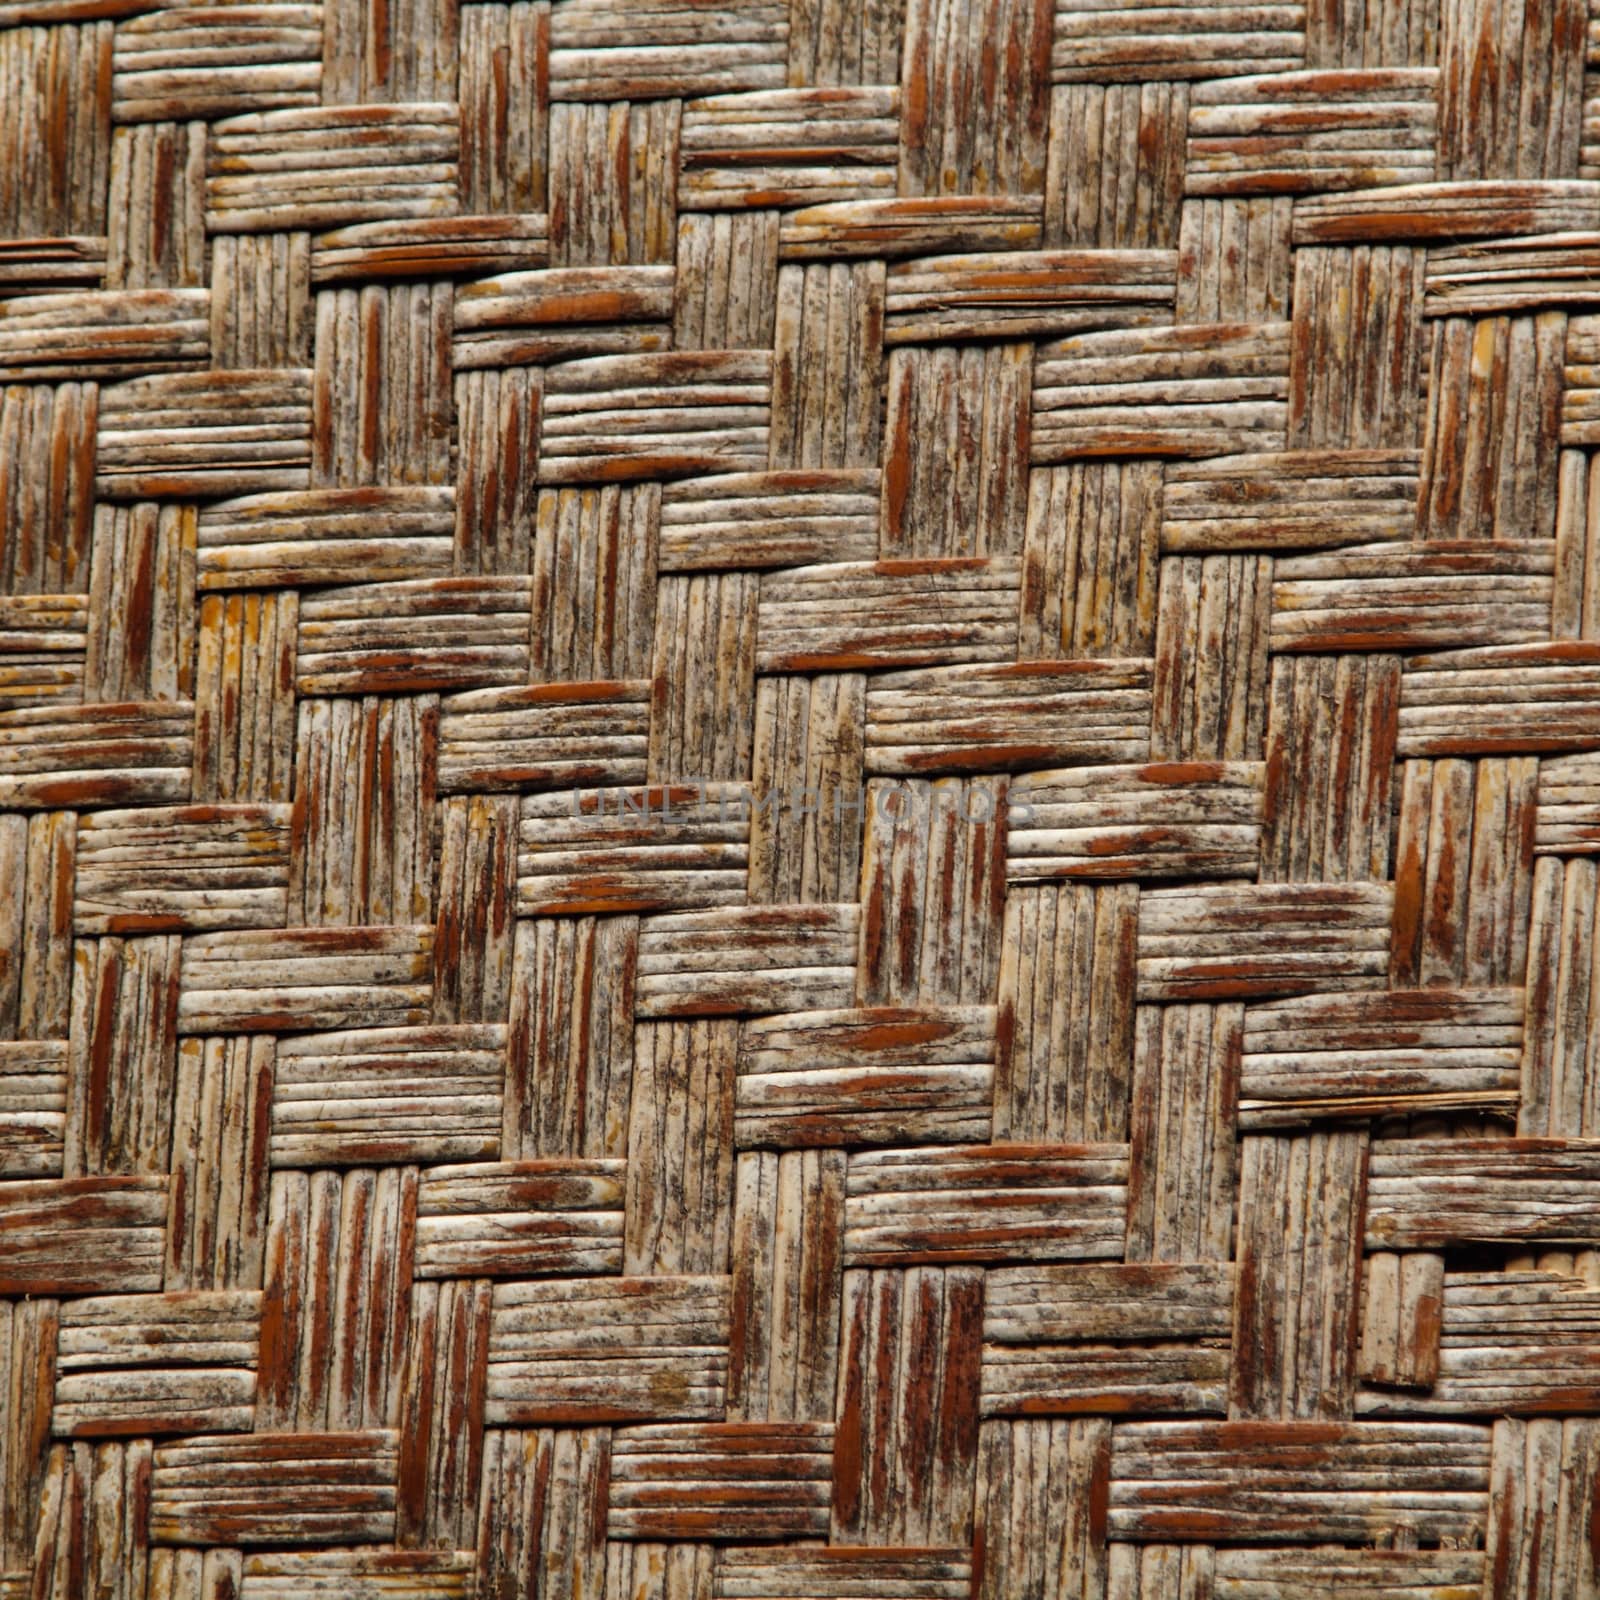 Wicker or rattan or bamboo material